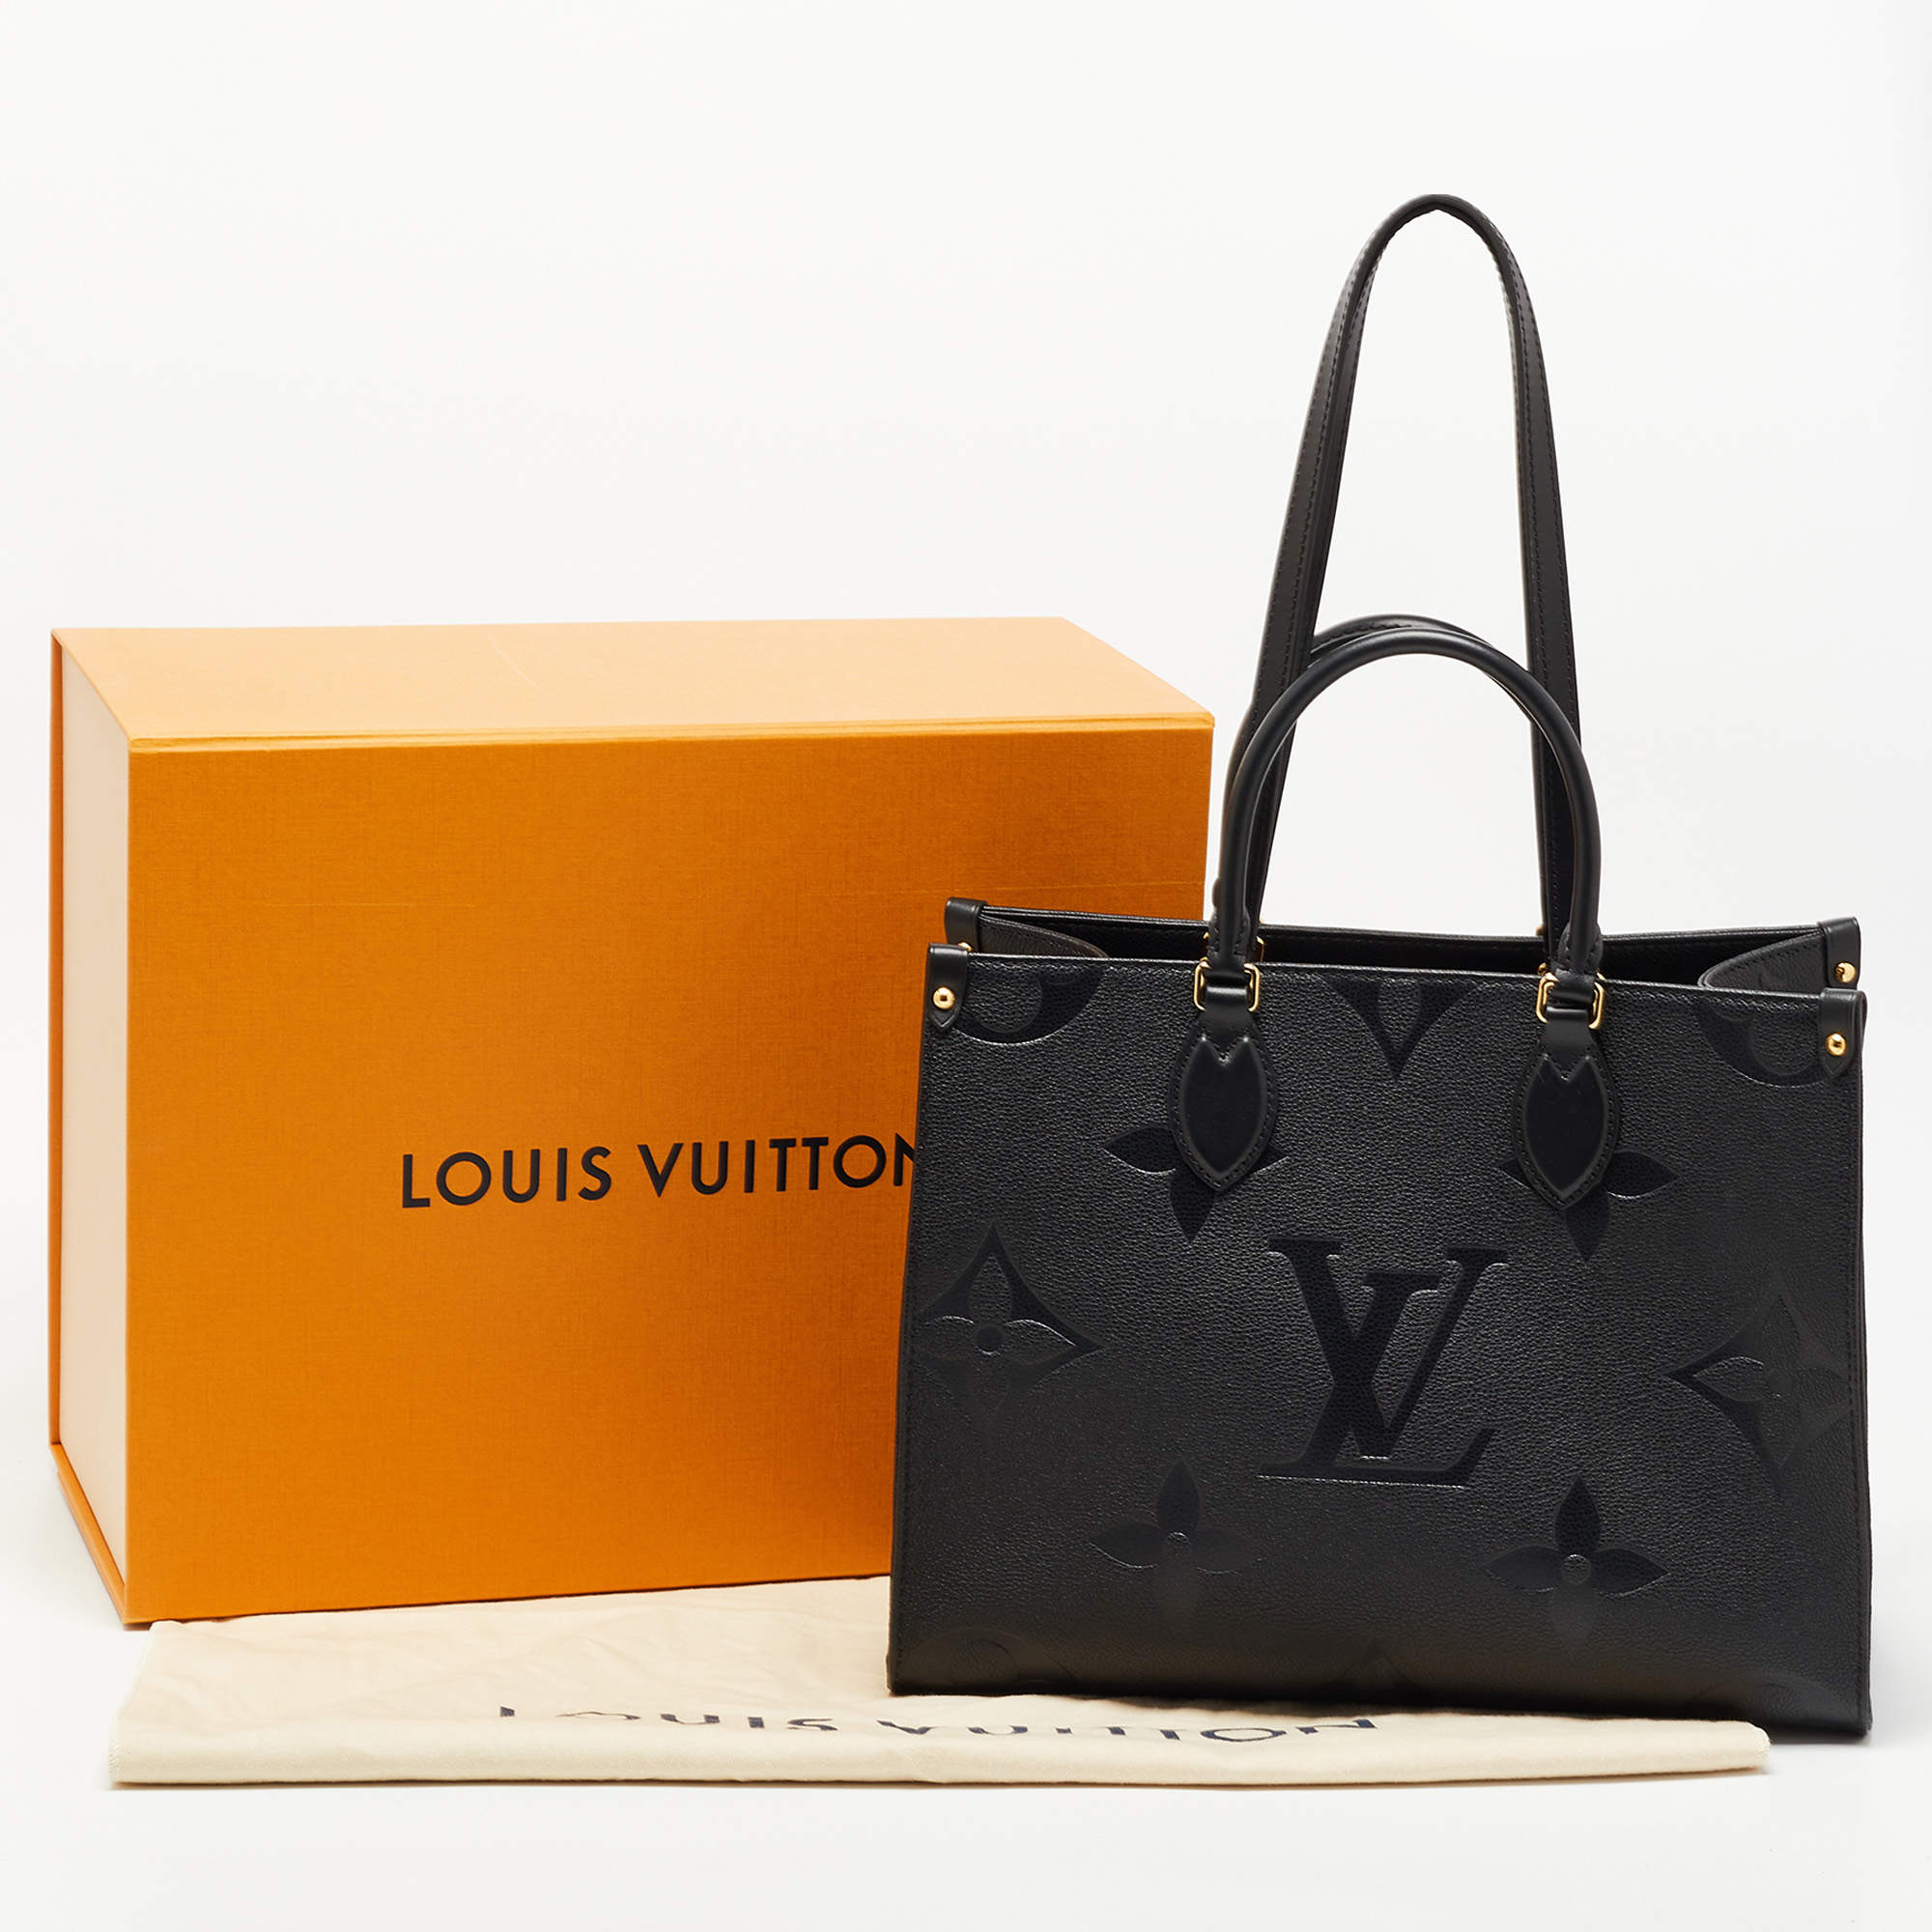 Louis Vuitton - Authenticated OnTheGo Handbag - Leather Black for Women, Never Worn